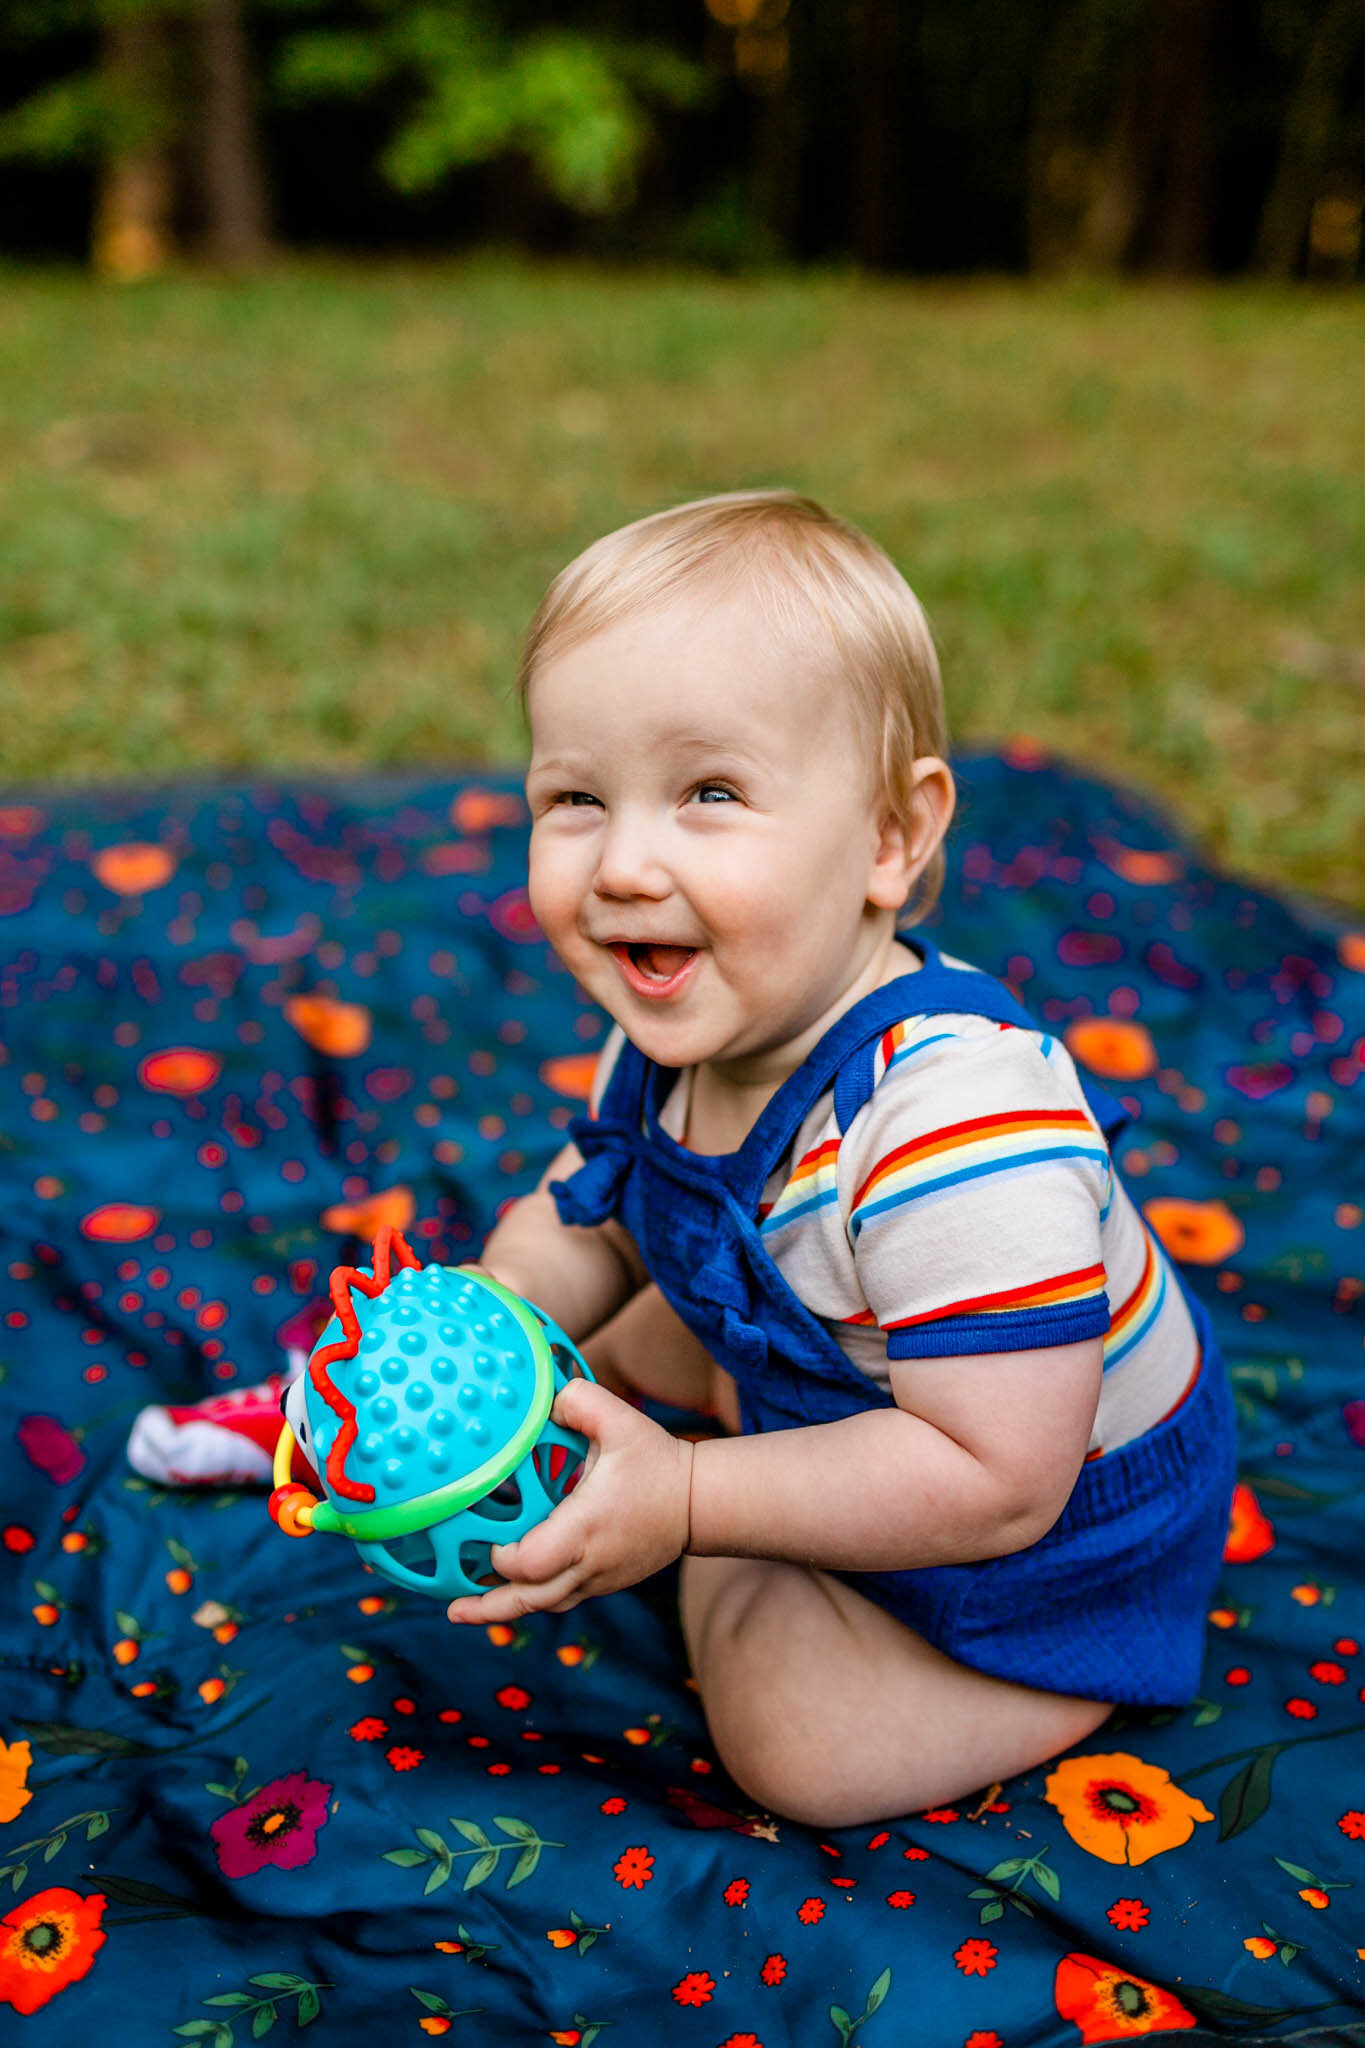 Raleigh Family Photographer | Umstead Park | By G. Lin Photography | Baby boy laughing and holding toy